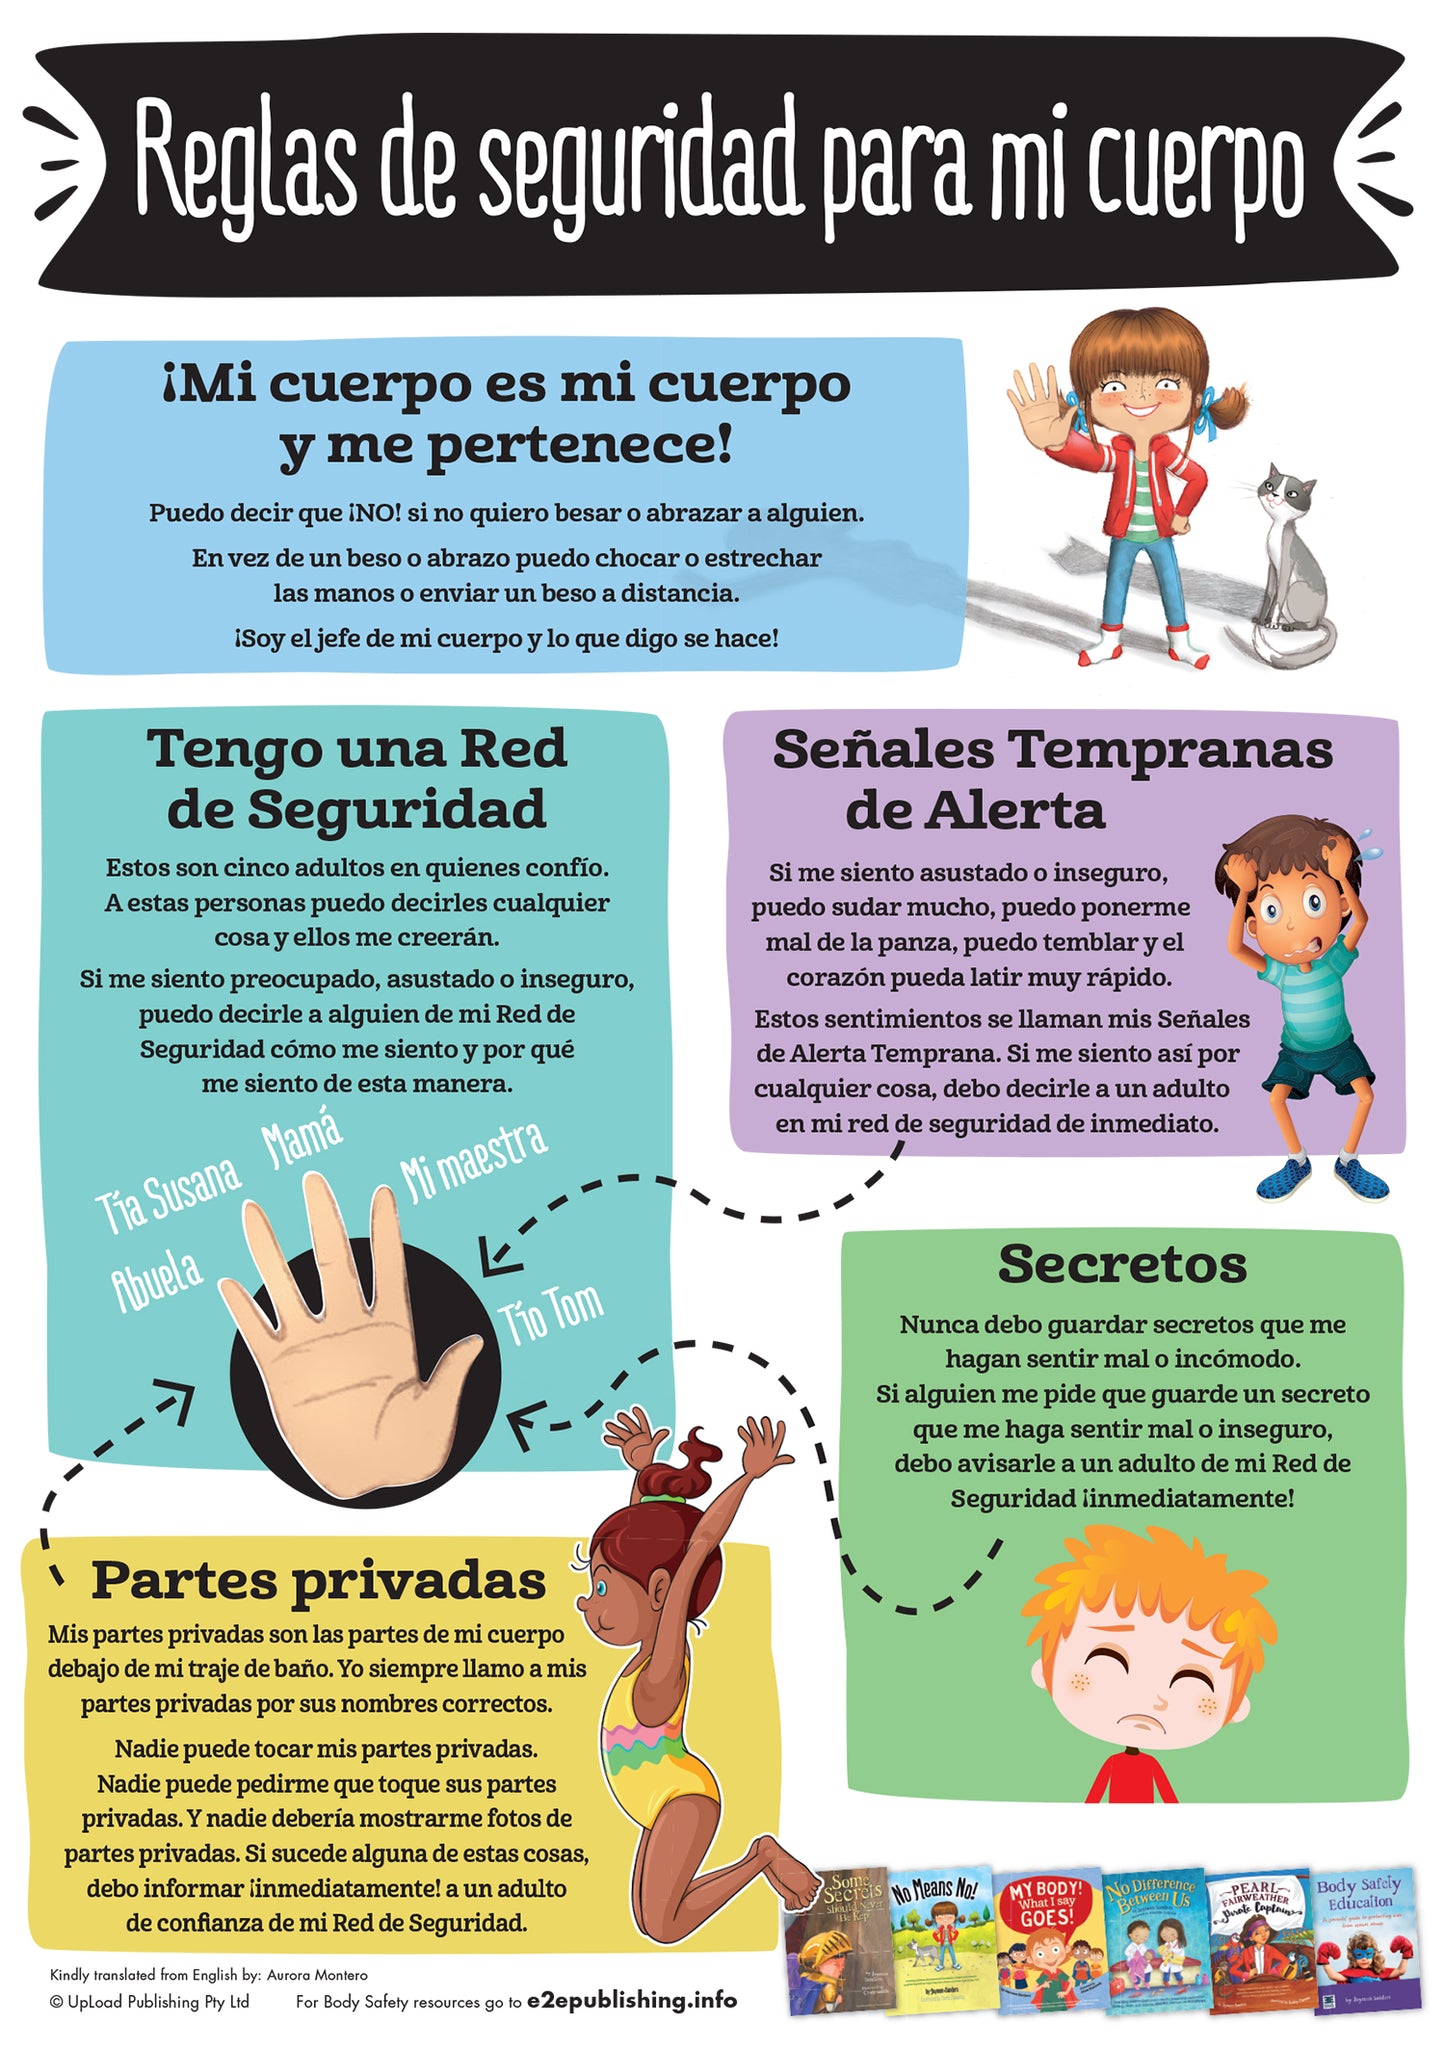 Body Safety Rules poster for children, written in Spanish.